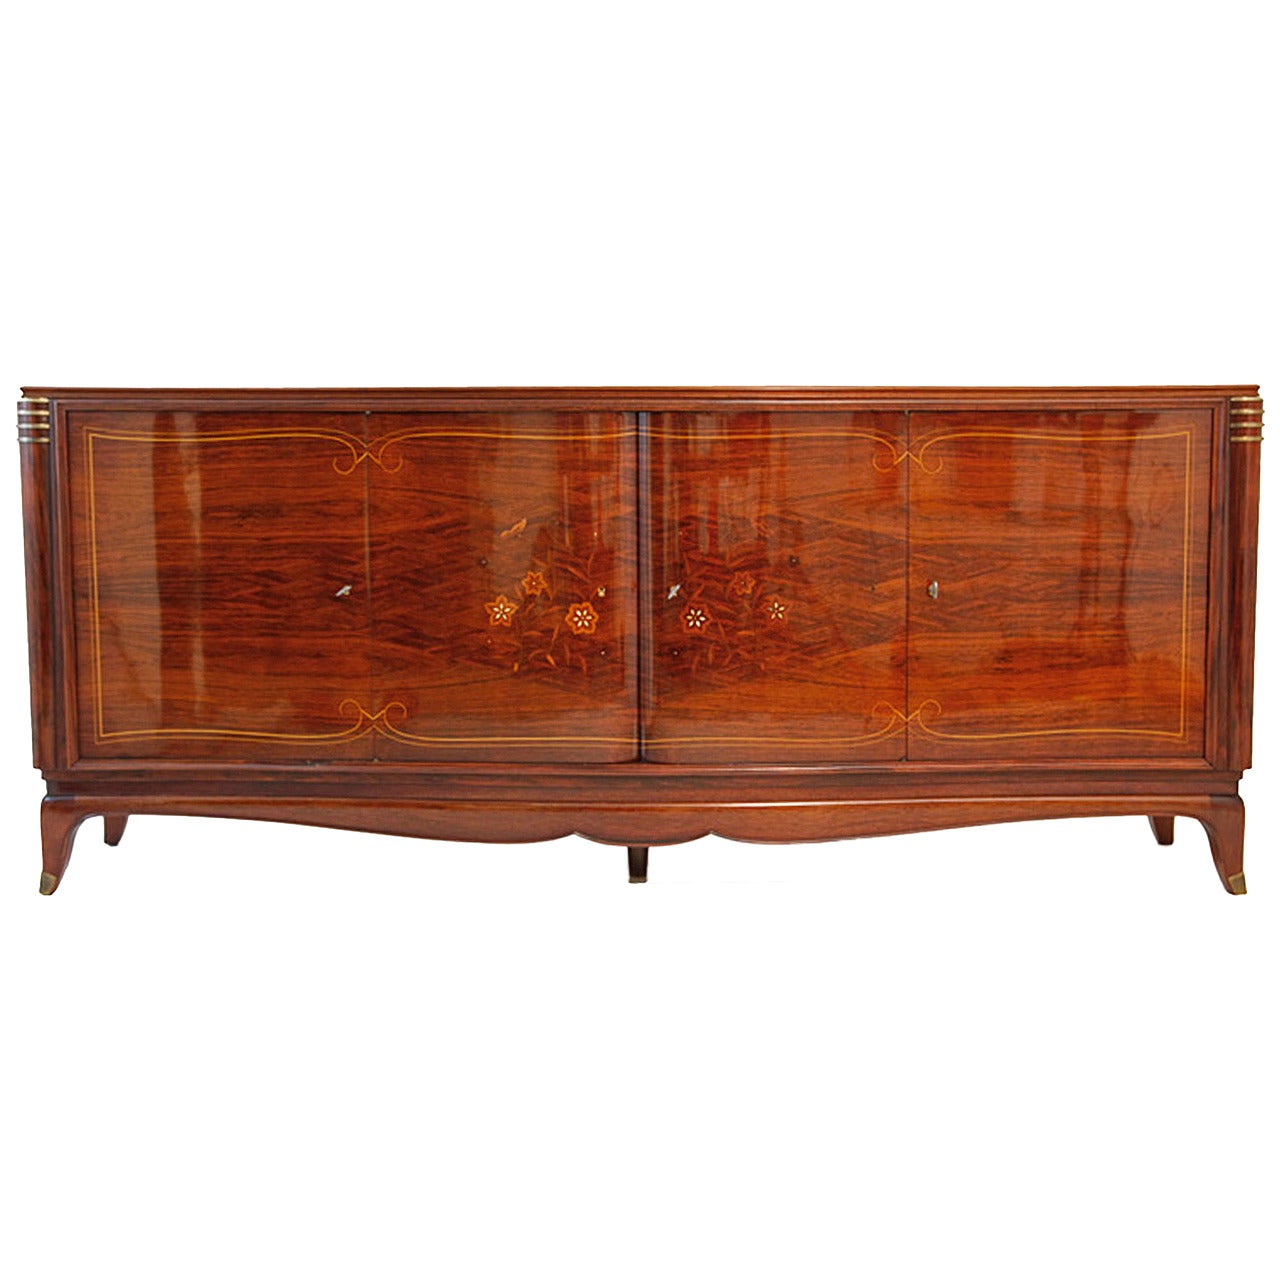 Sideboard in the Style of Leleu